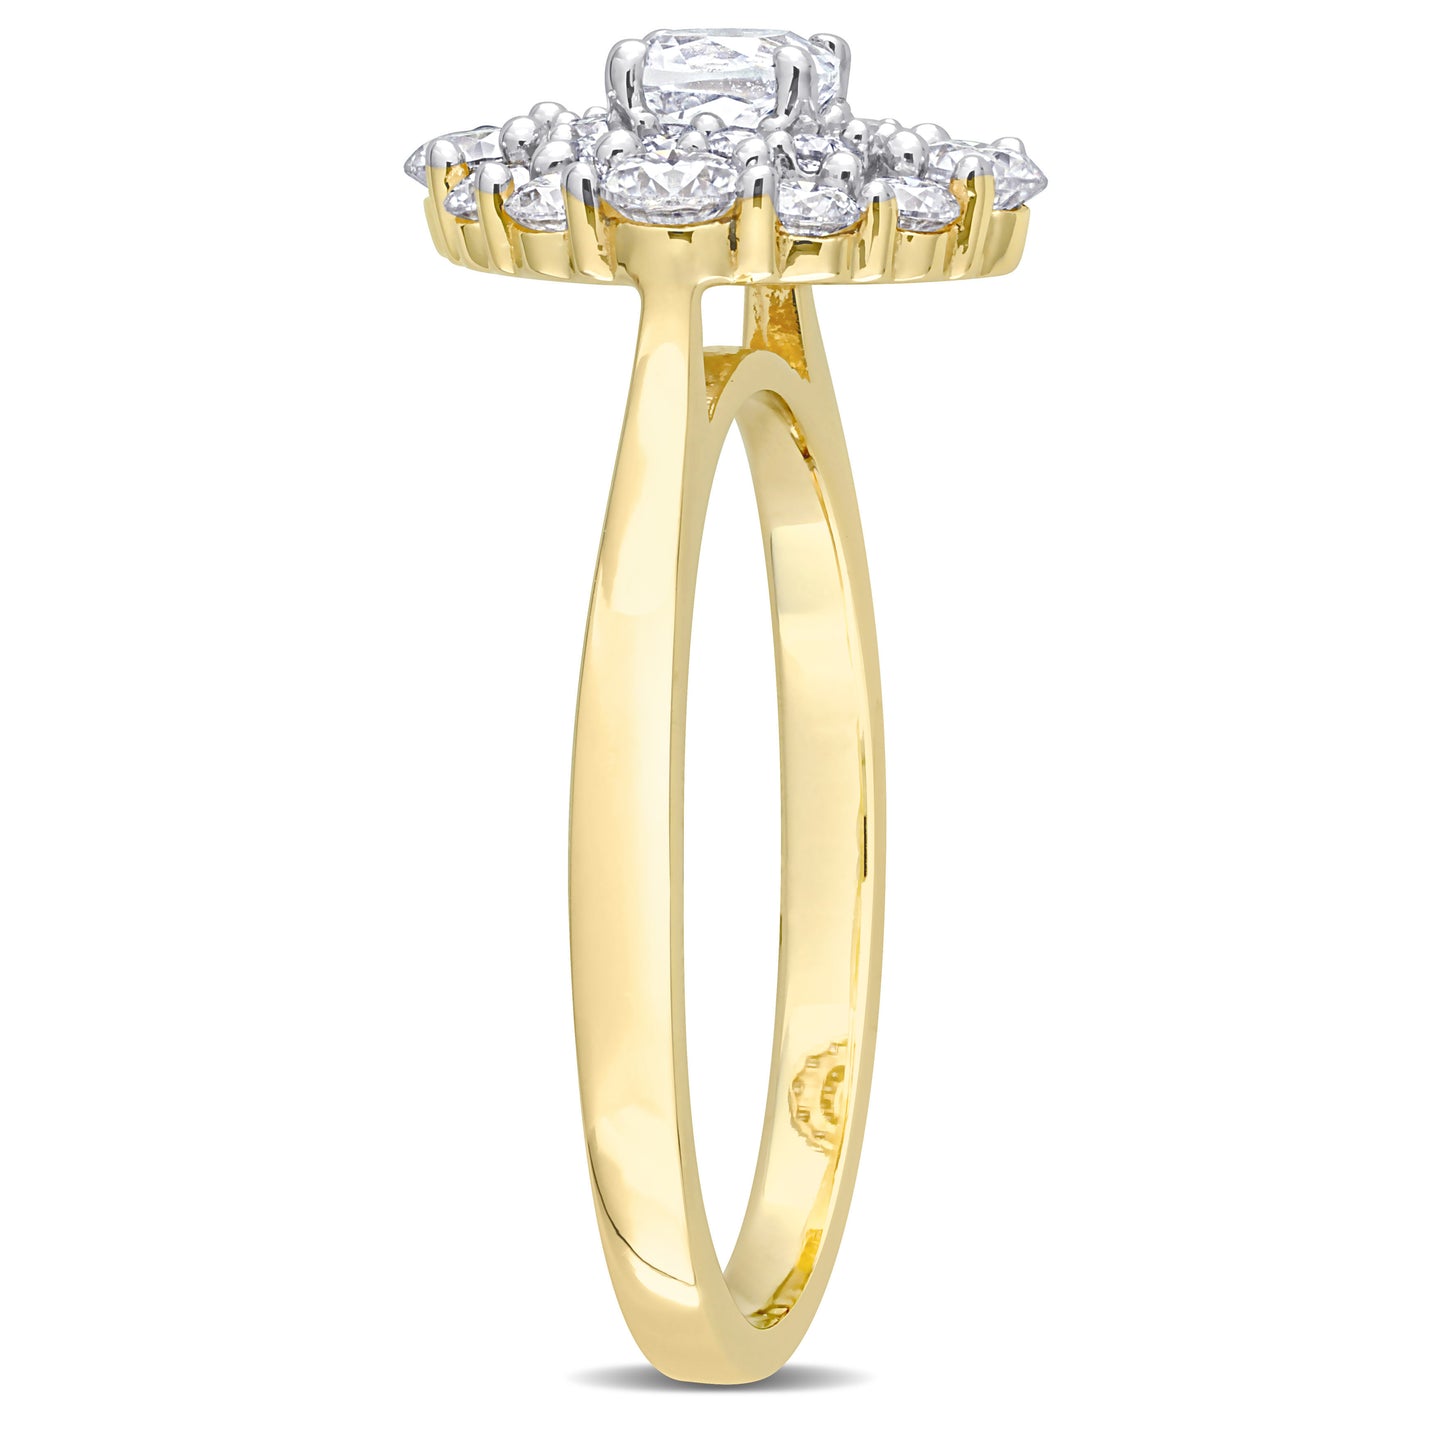 1ct Cushion Cut Moissanite Cluster Engagement Ring in 10k Yellow Gold